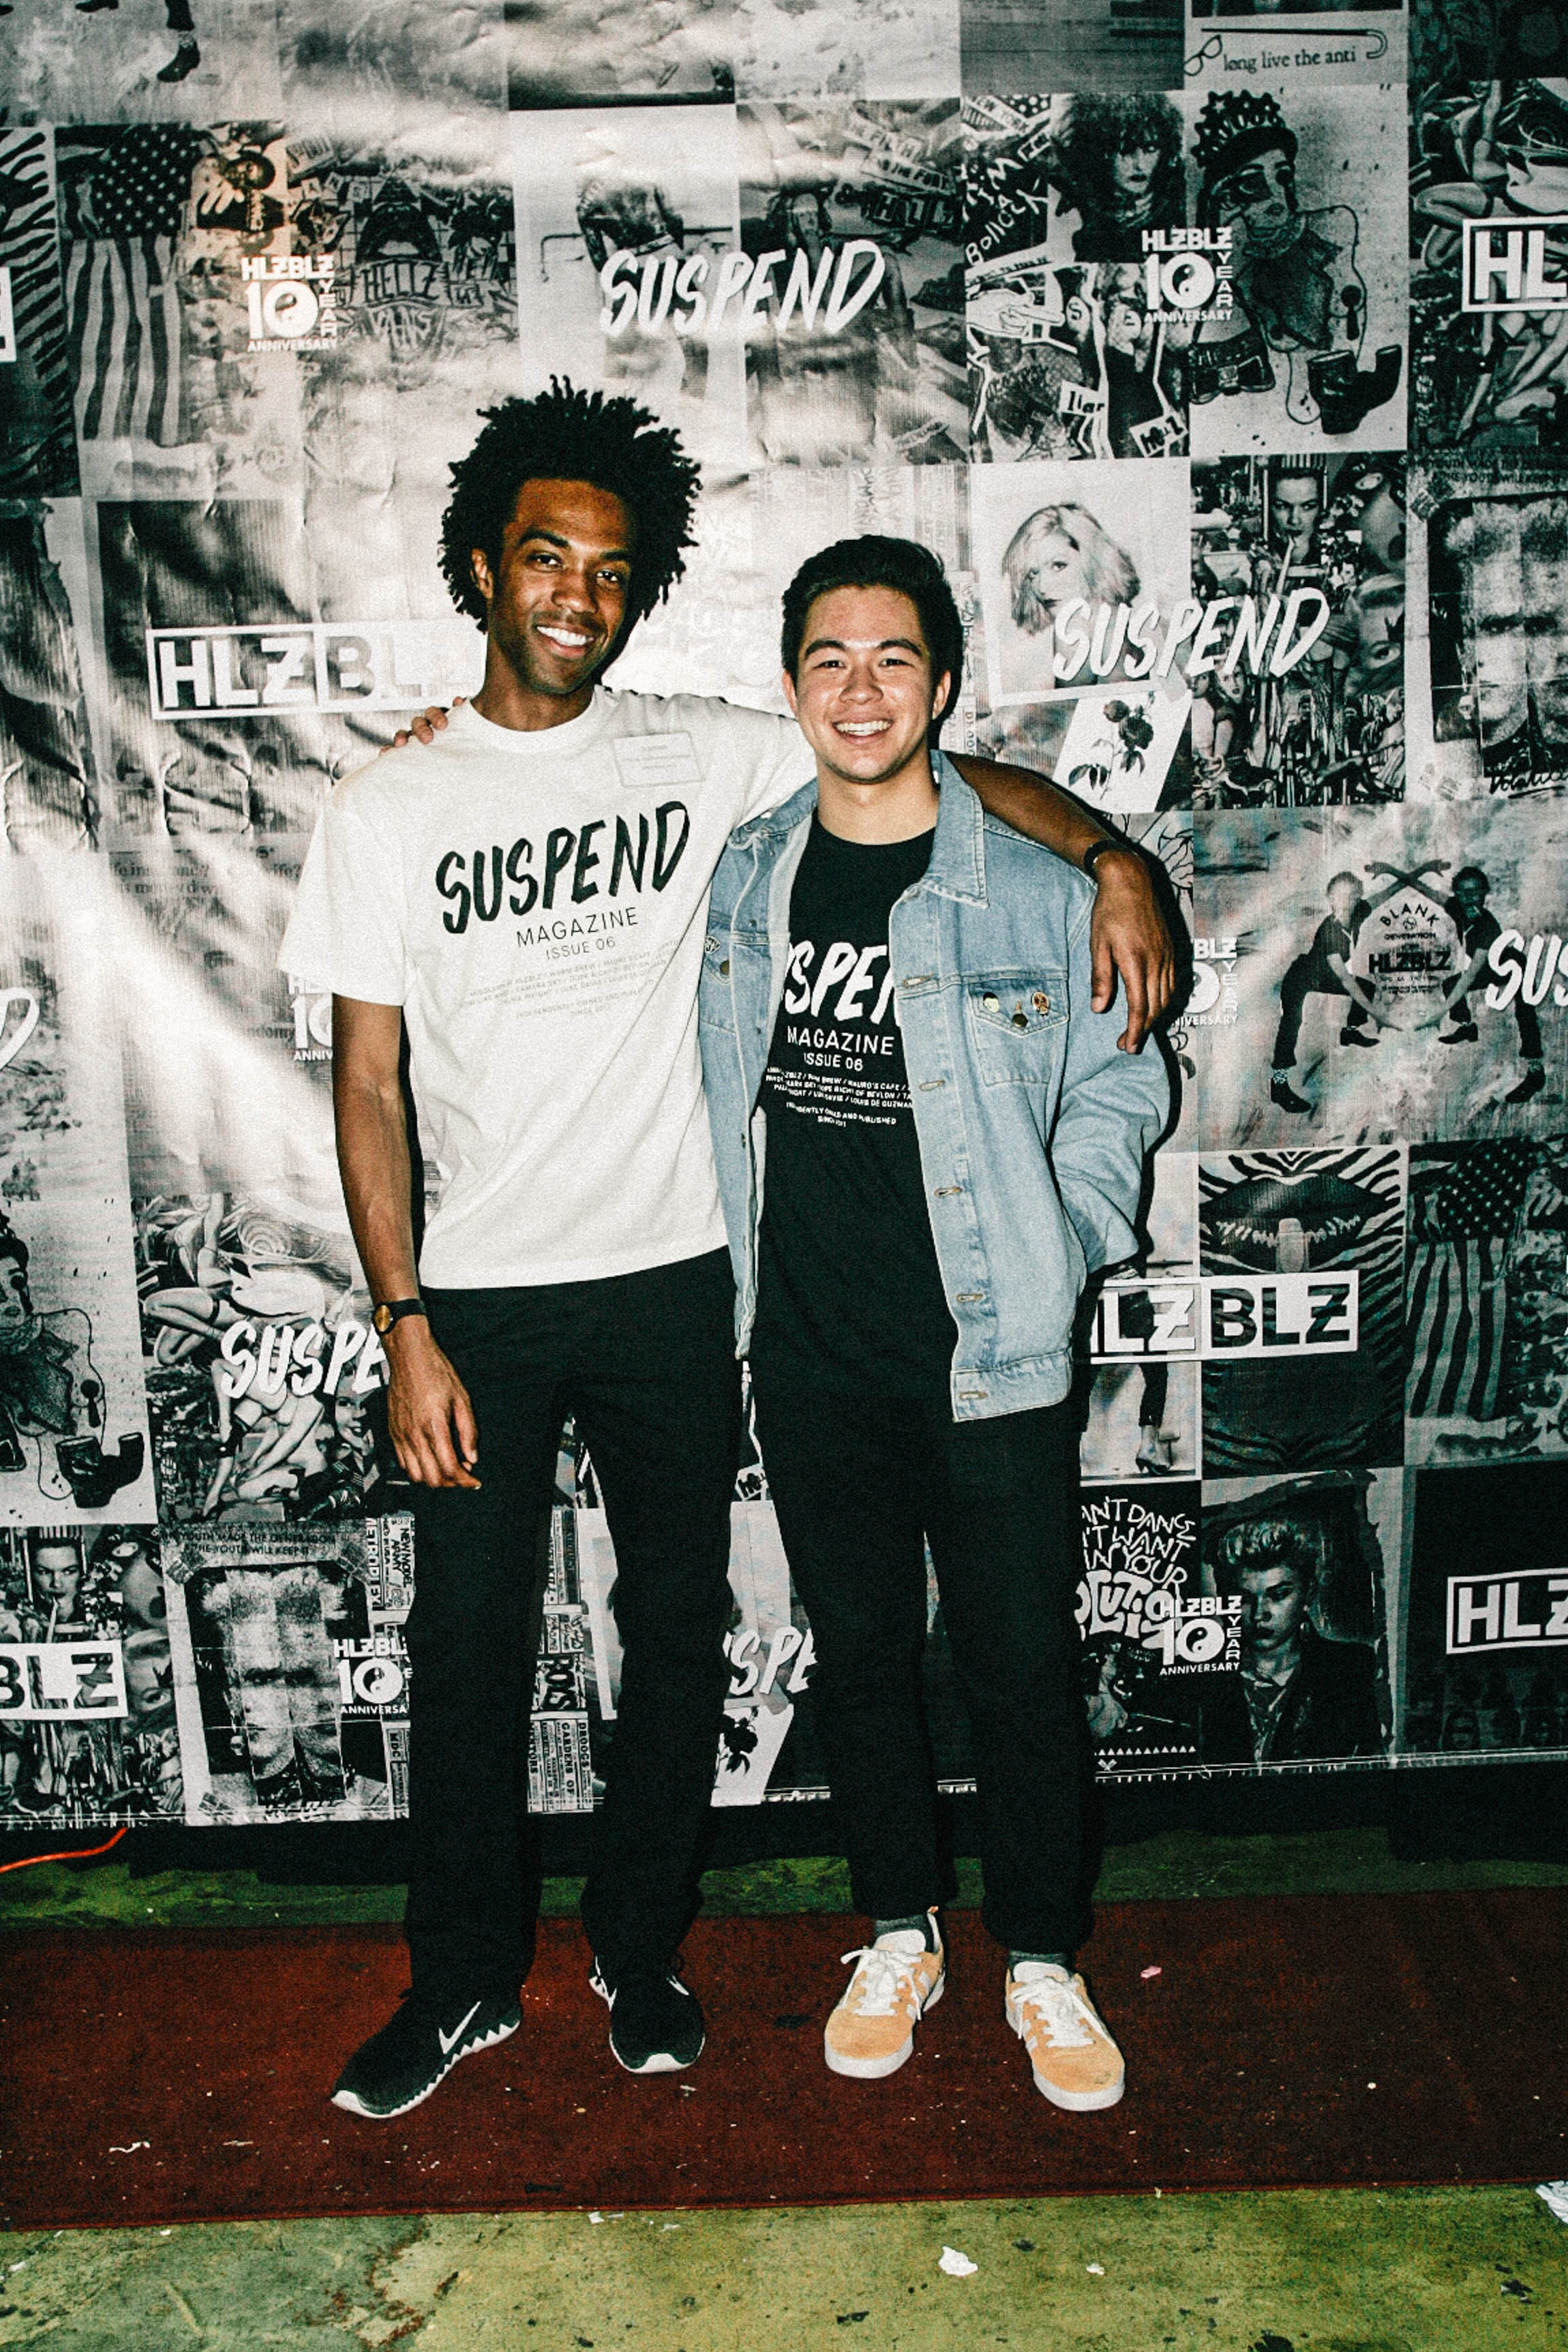  Jonathan Tate and Brennan de Aguirre of SUSPEND at the ISSUE 06 Release Party x 10YR HLZBLZ Anniversary (Feb 11) at Globe Theater. 